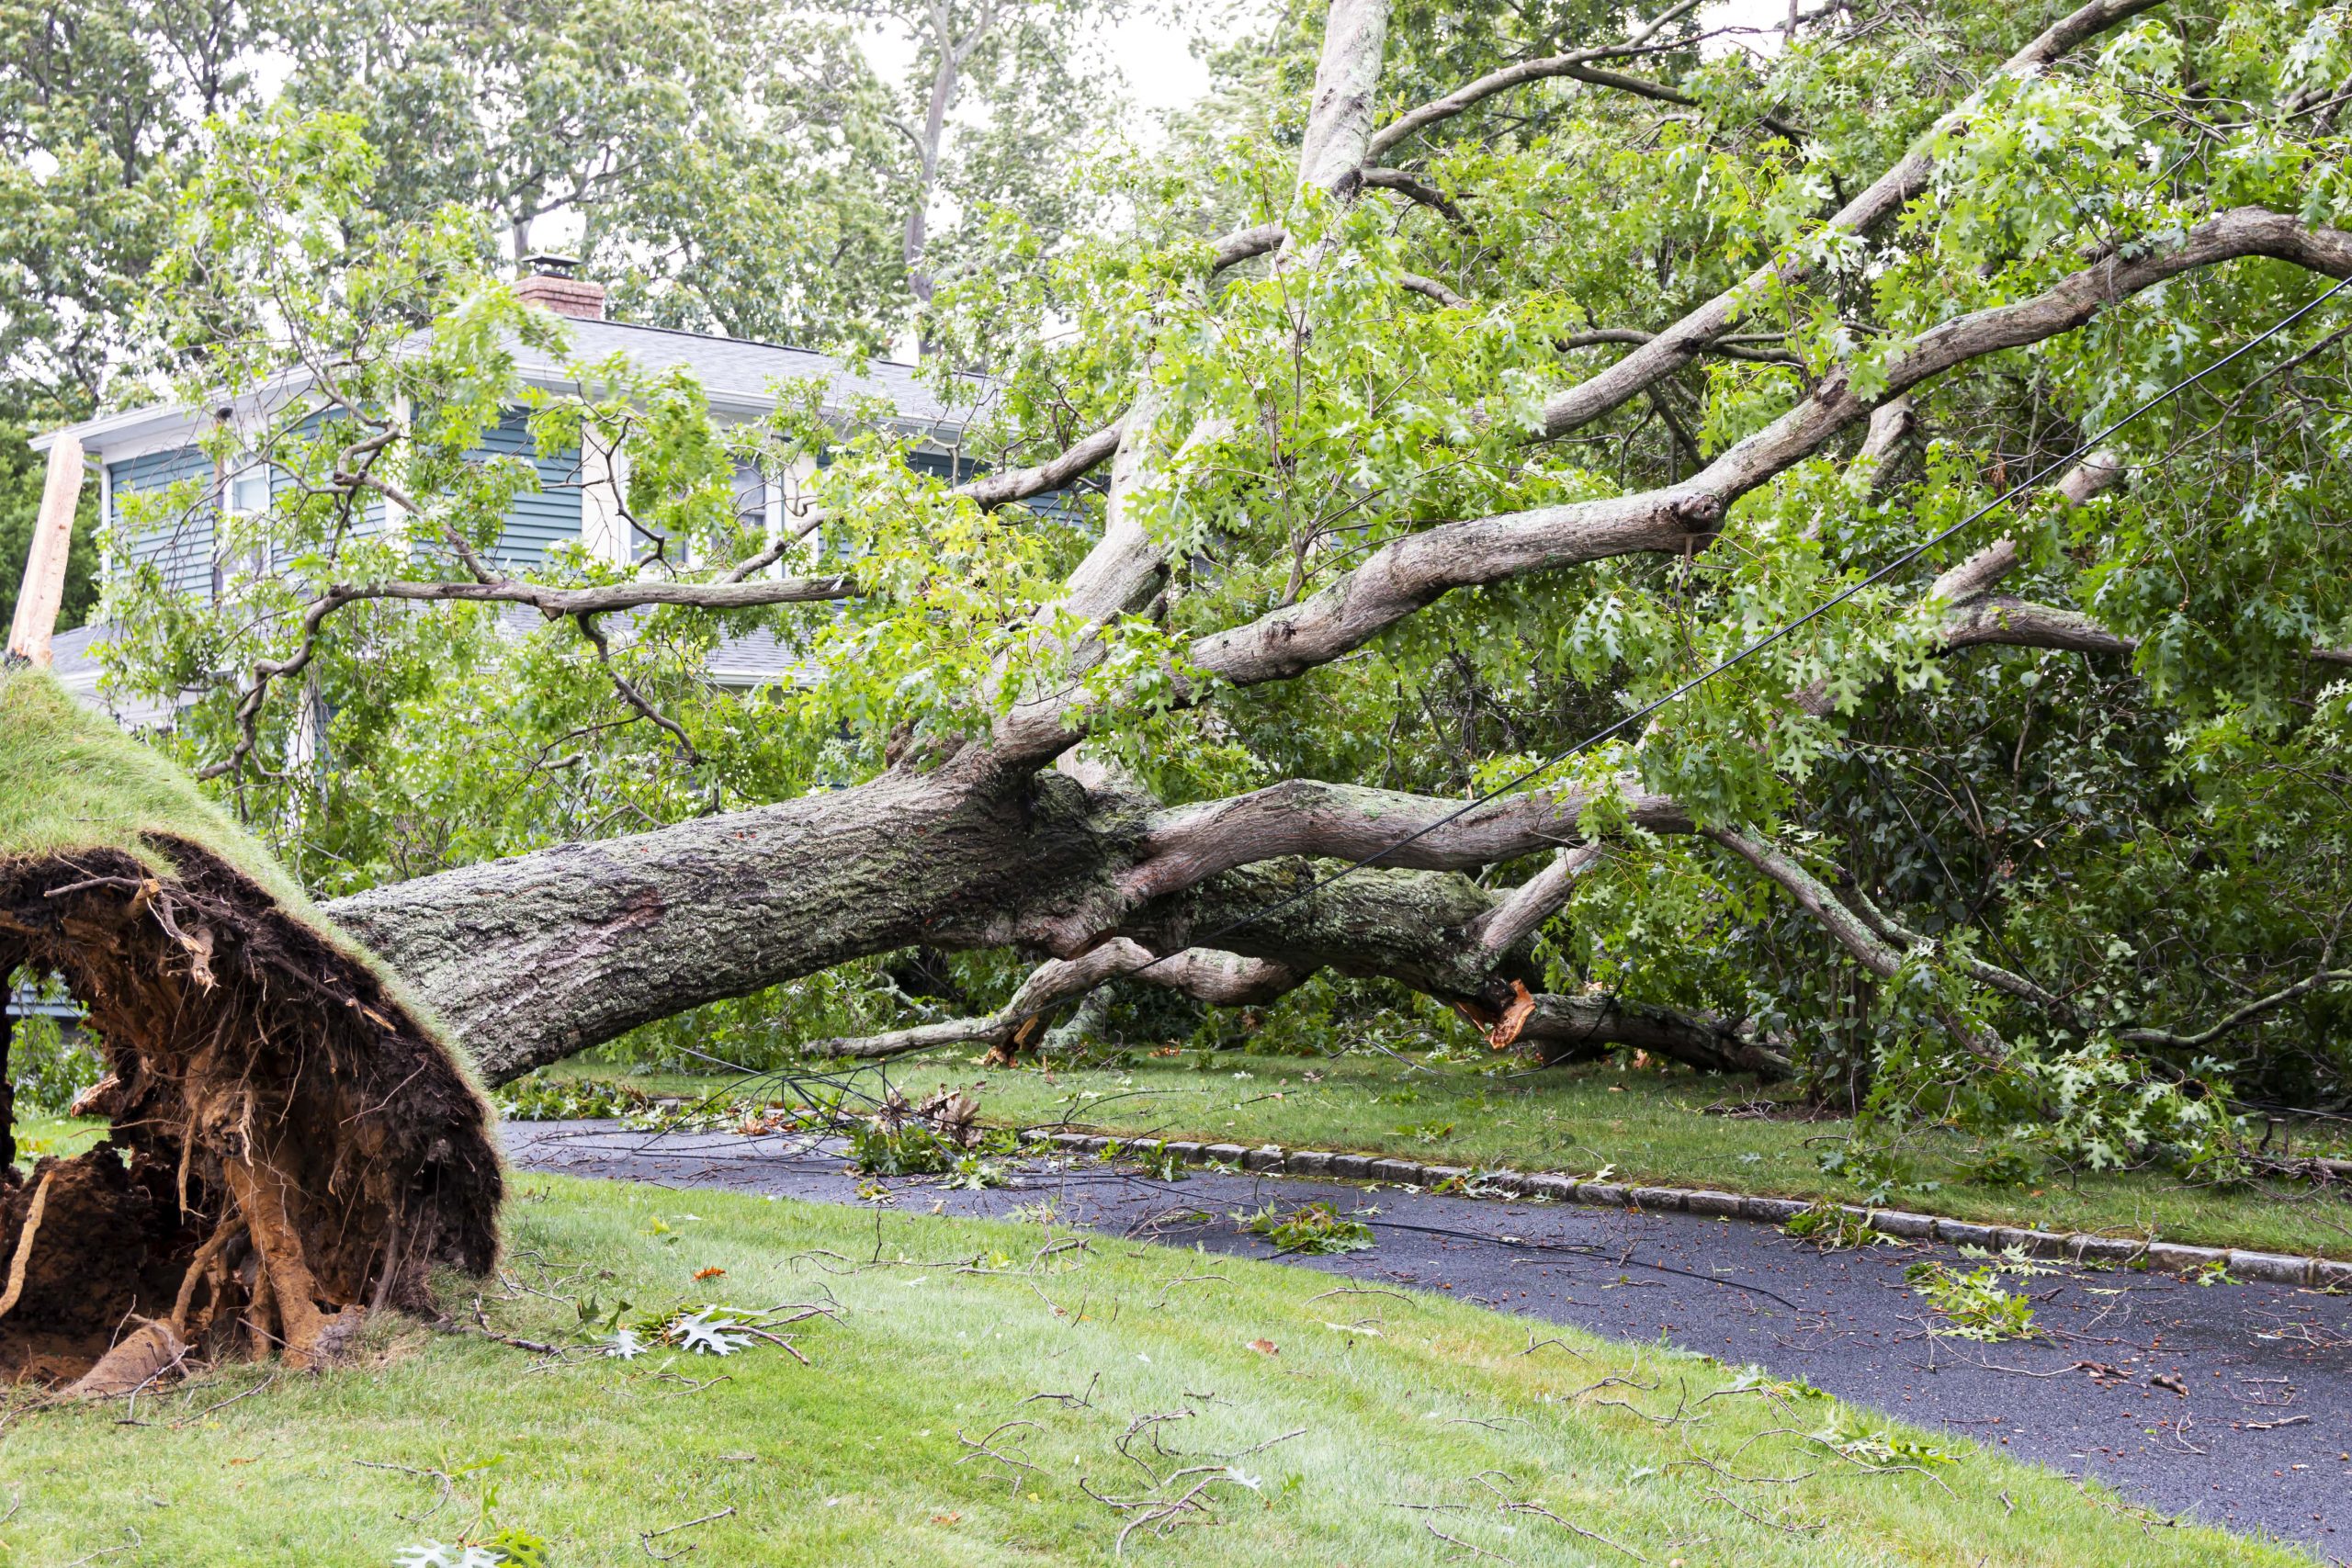 A fallen tree laying on someones driveway